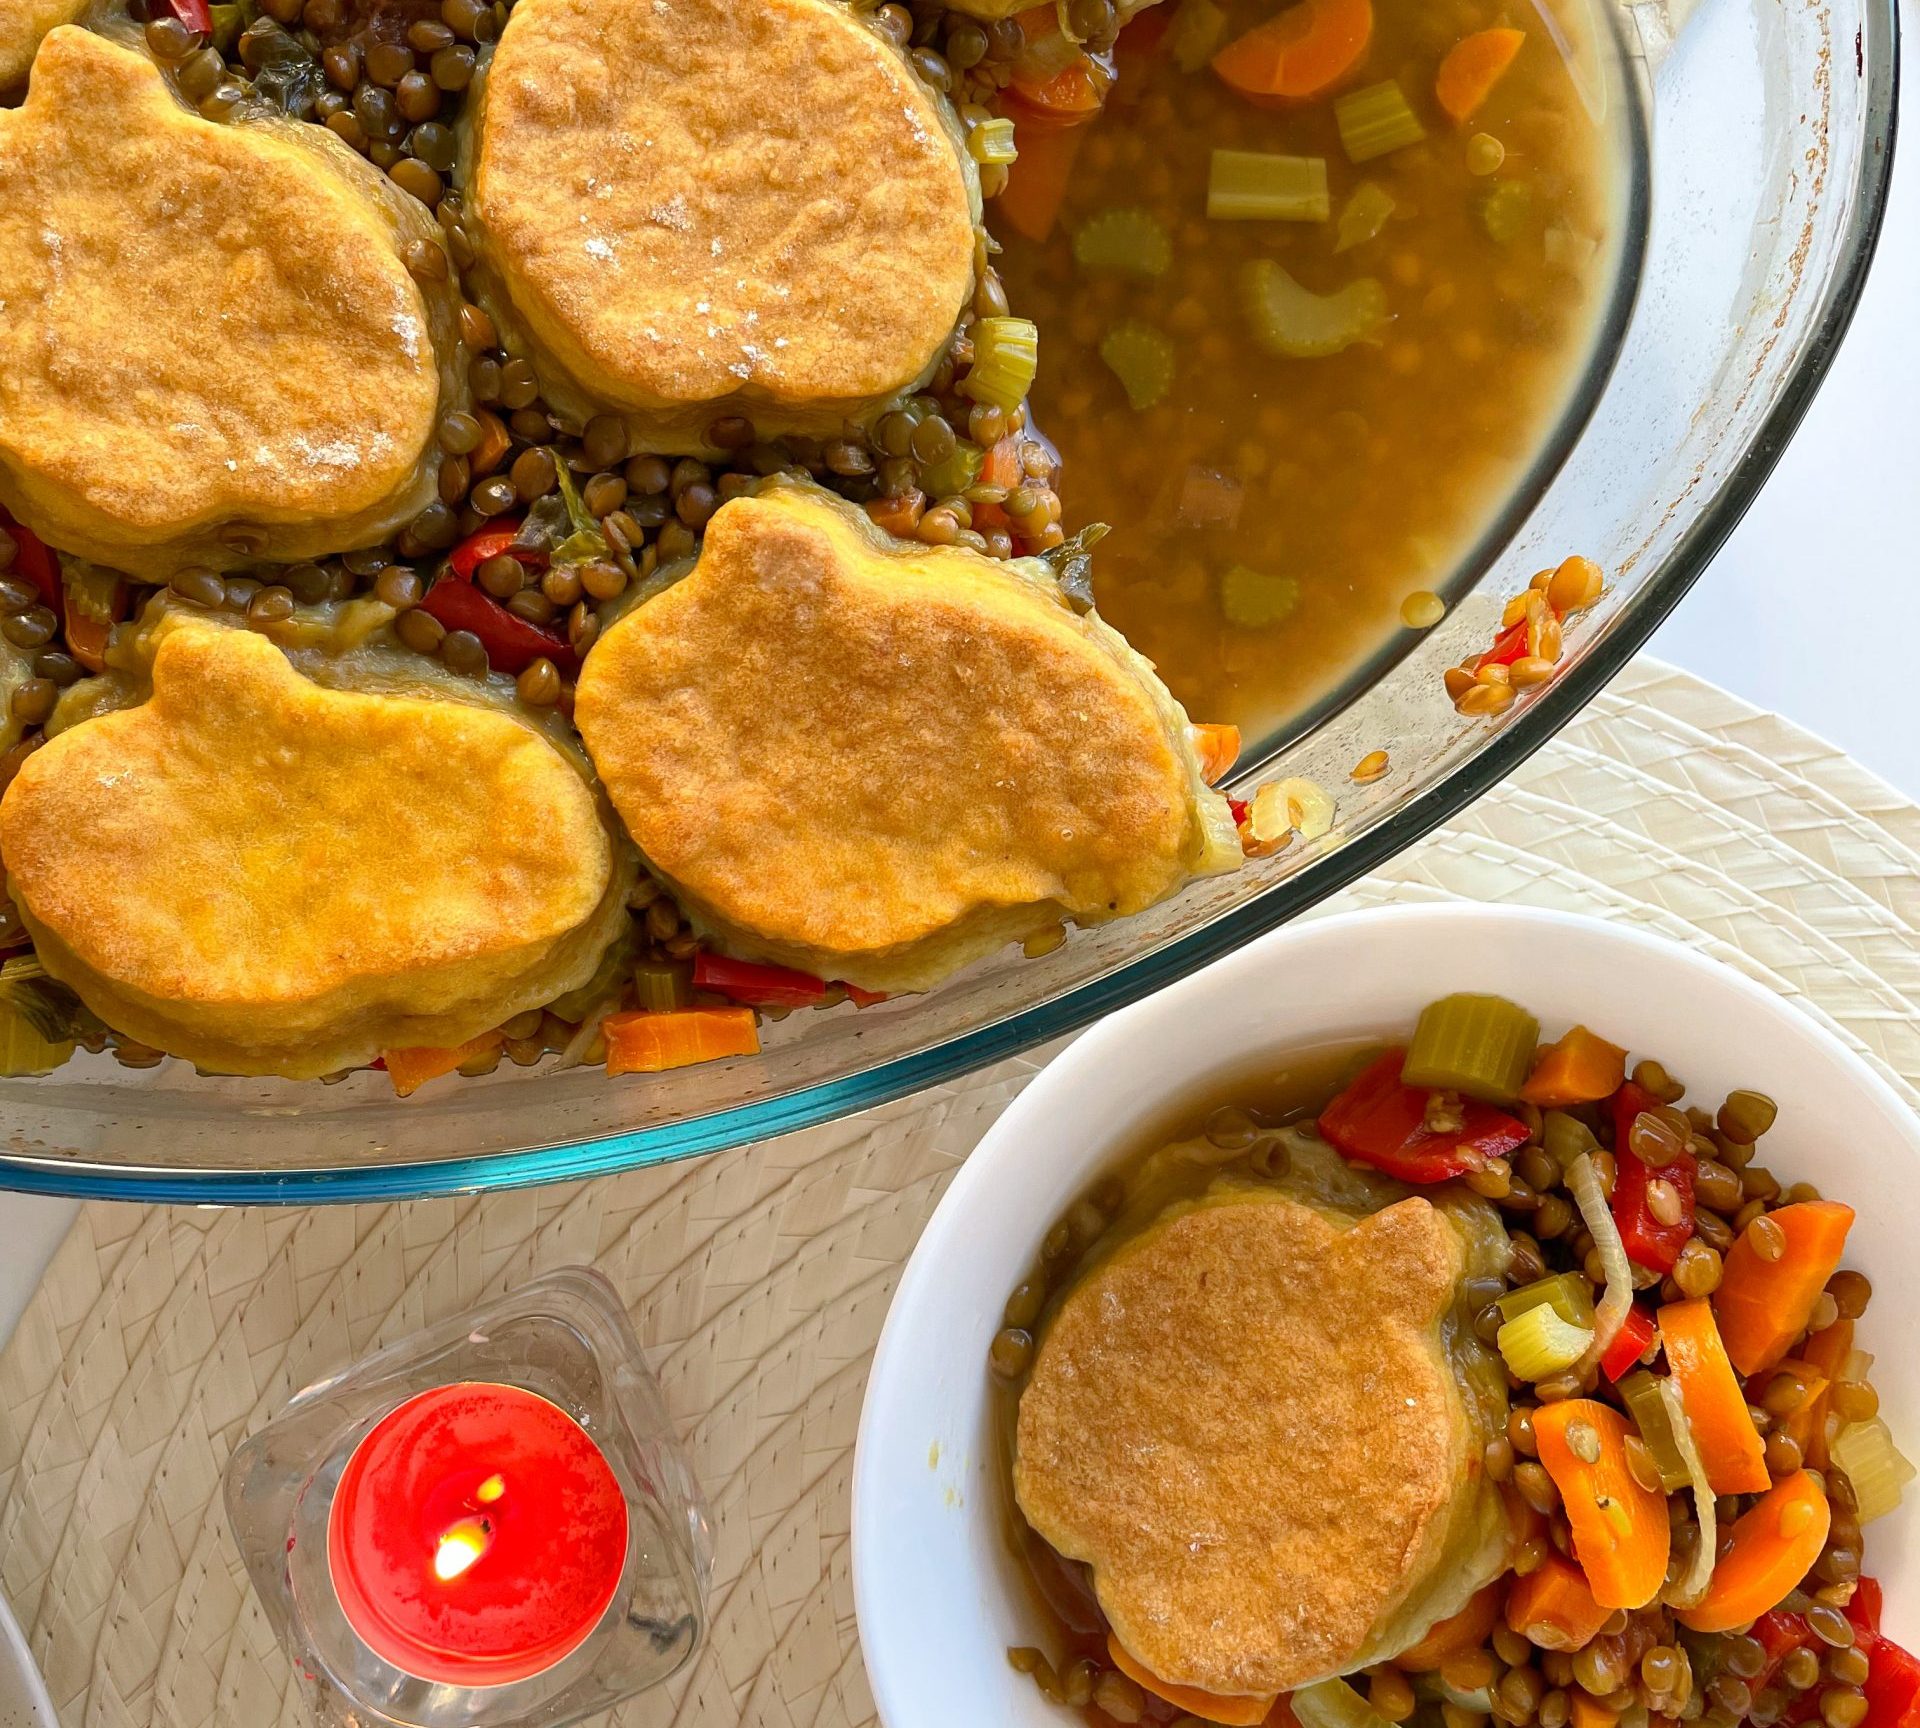 Vegan Lentil Pot Pie Soup with Pumpkin Biscuit | Cozy meal I made this fall